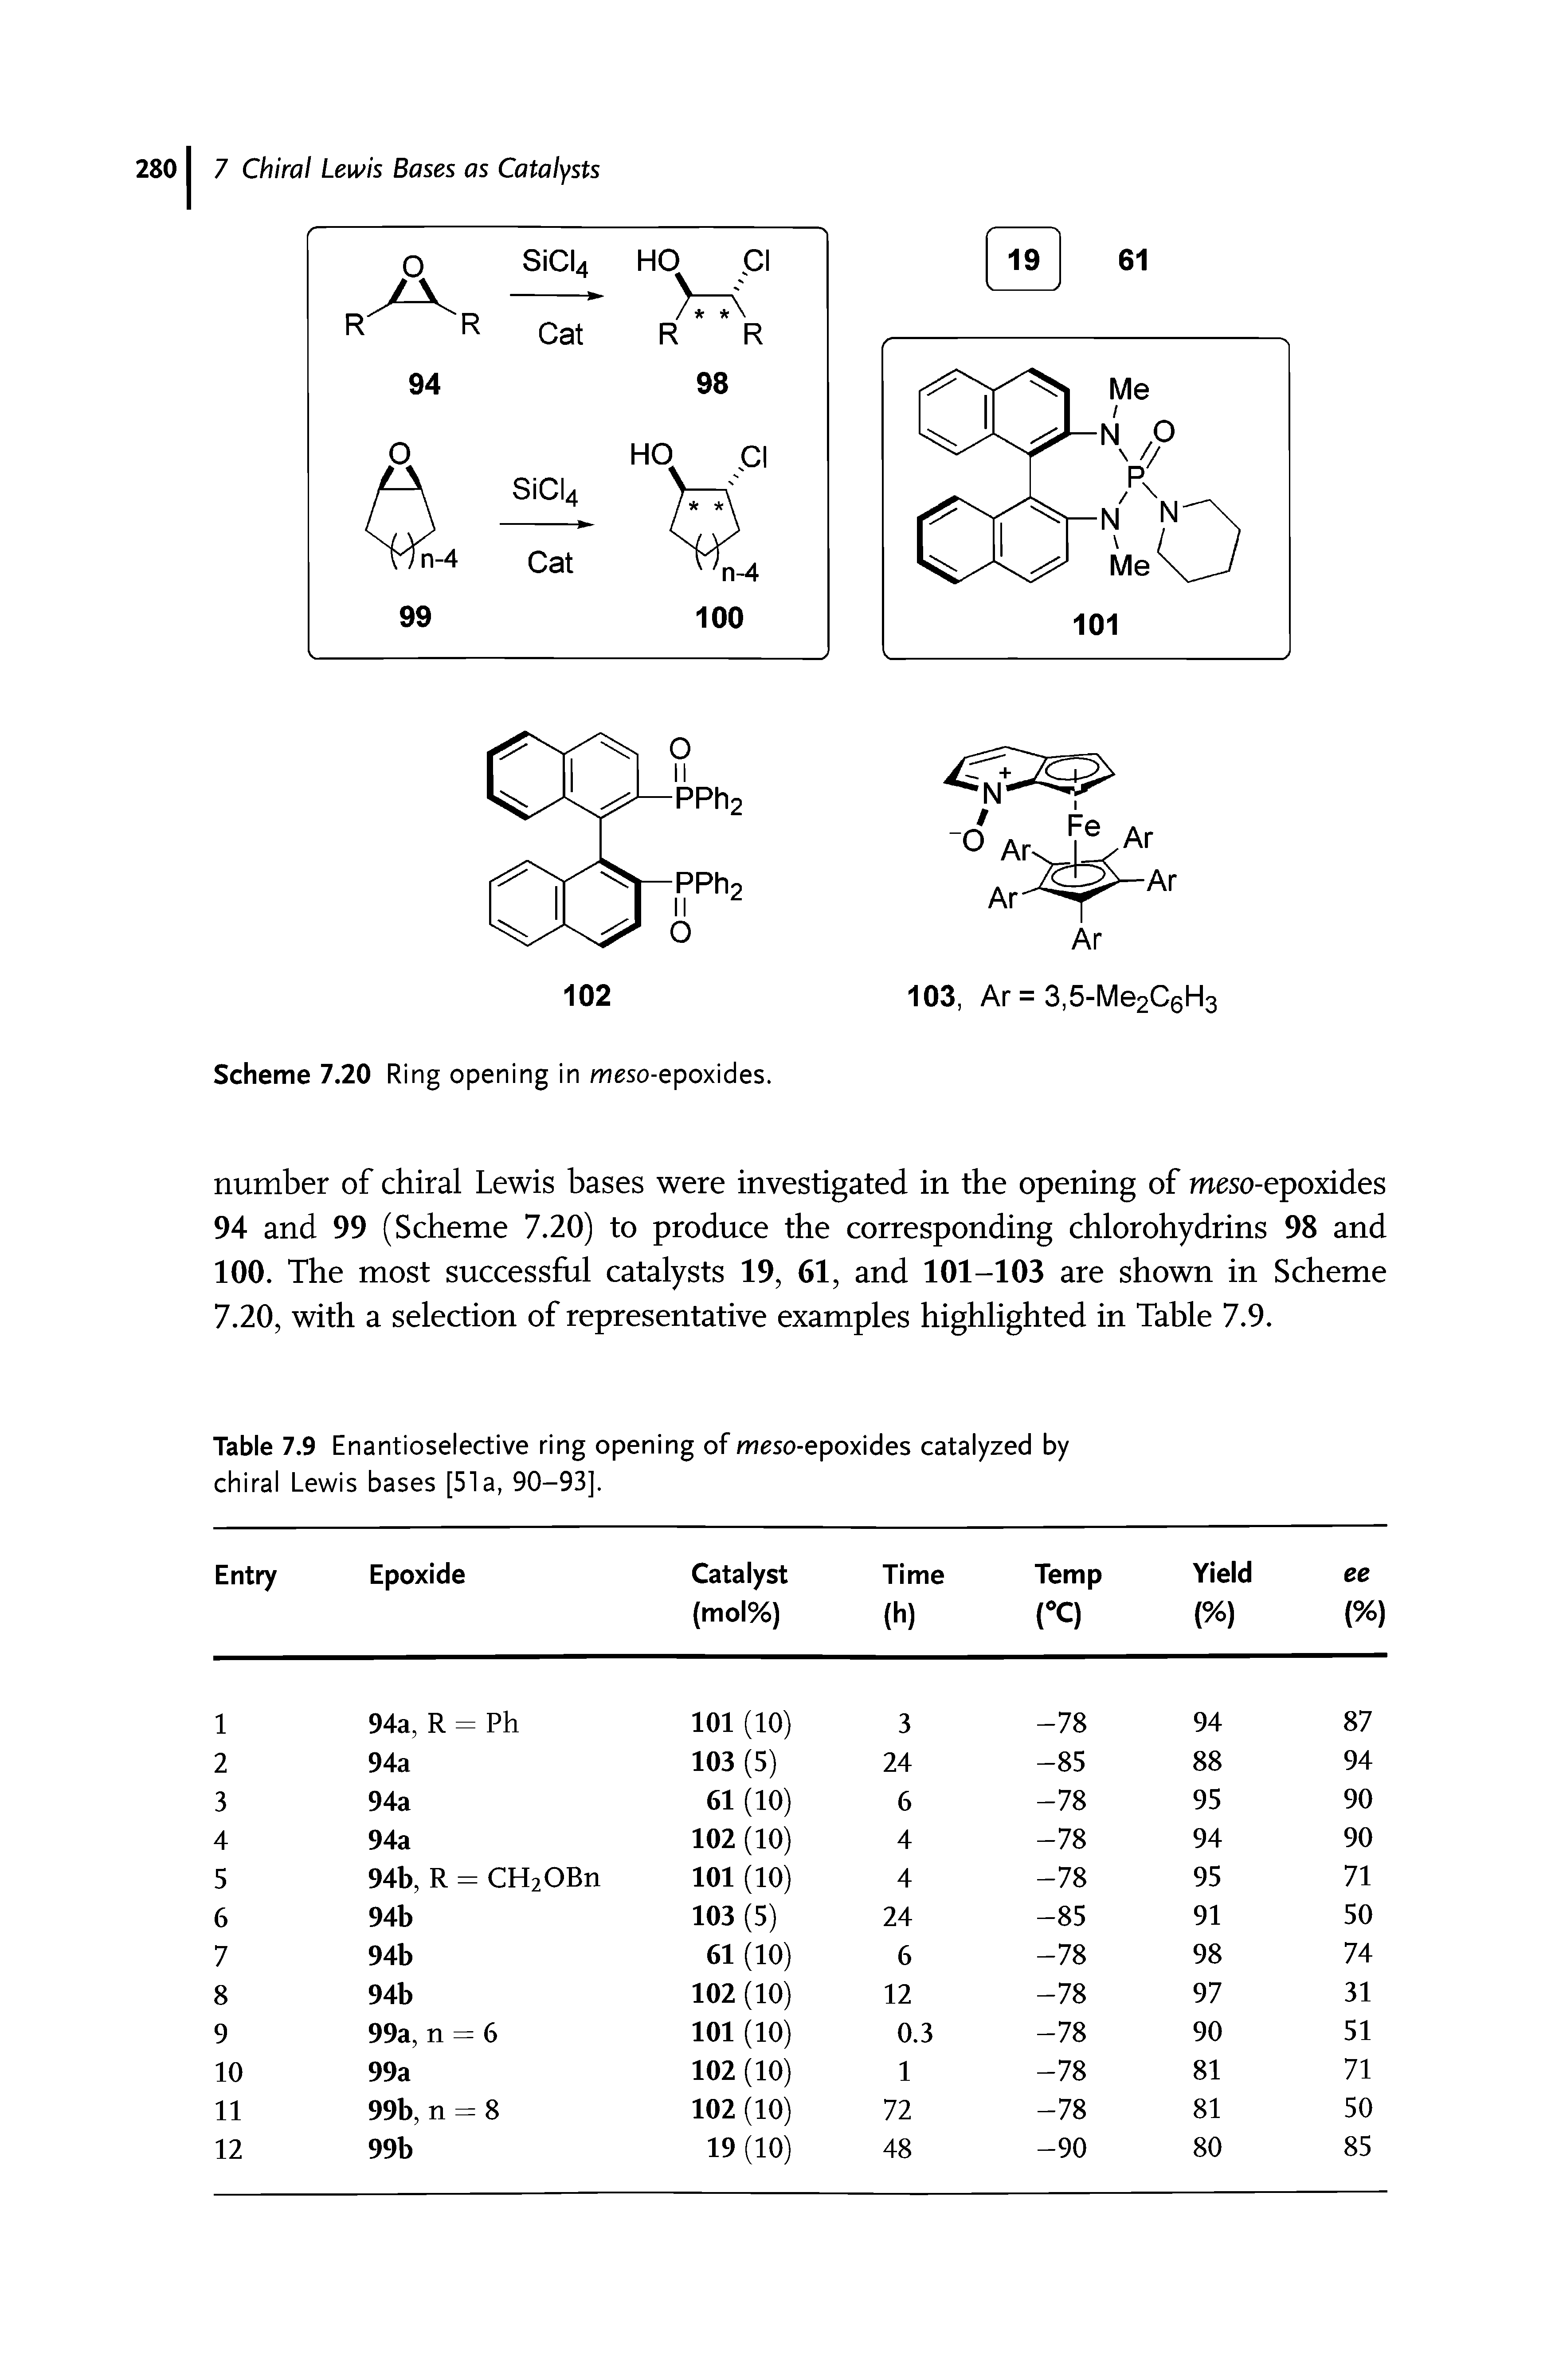 Table 7.9 Enantioselective ring opening of meso-e poxides catalyzed by chiral Lewis bases [51a, 90-93].